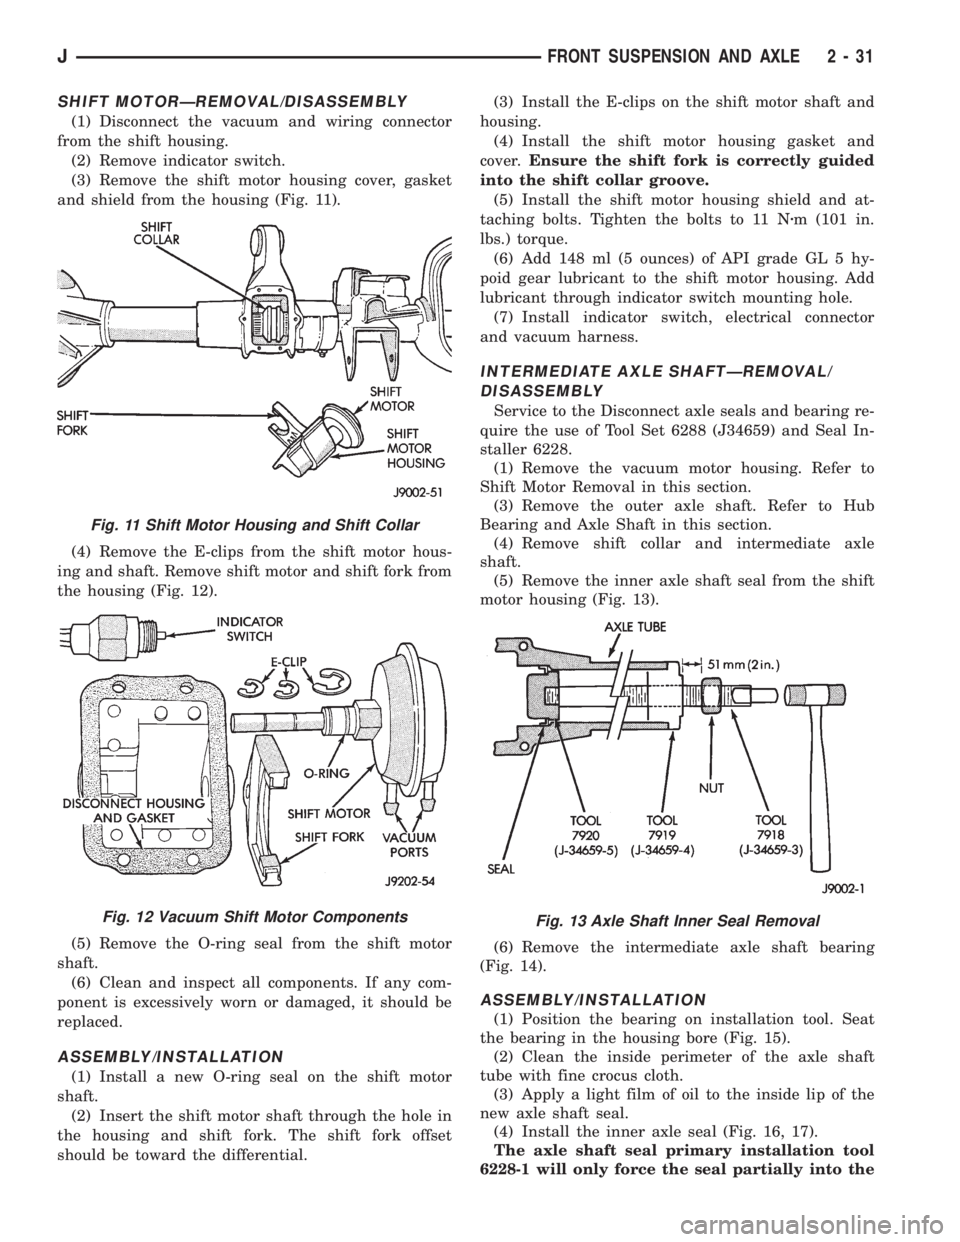 JEEP YJ 1995  Service And Repair Manual SHIFT MOTORÐREMOVAL/DISASSEMBLY
(1) Disconnect the vacuum and wiring connector
from the shift housing.
(2) Remove indicator switch.
(3) Remove the shift motor housing cover, gasket
and shield from th